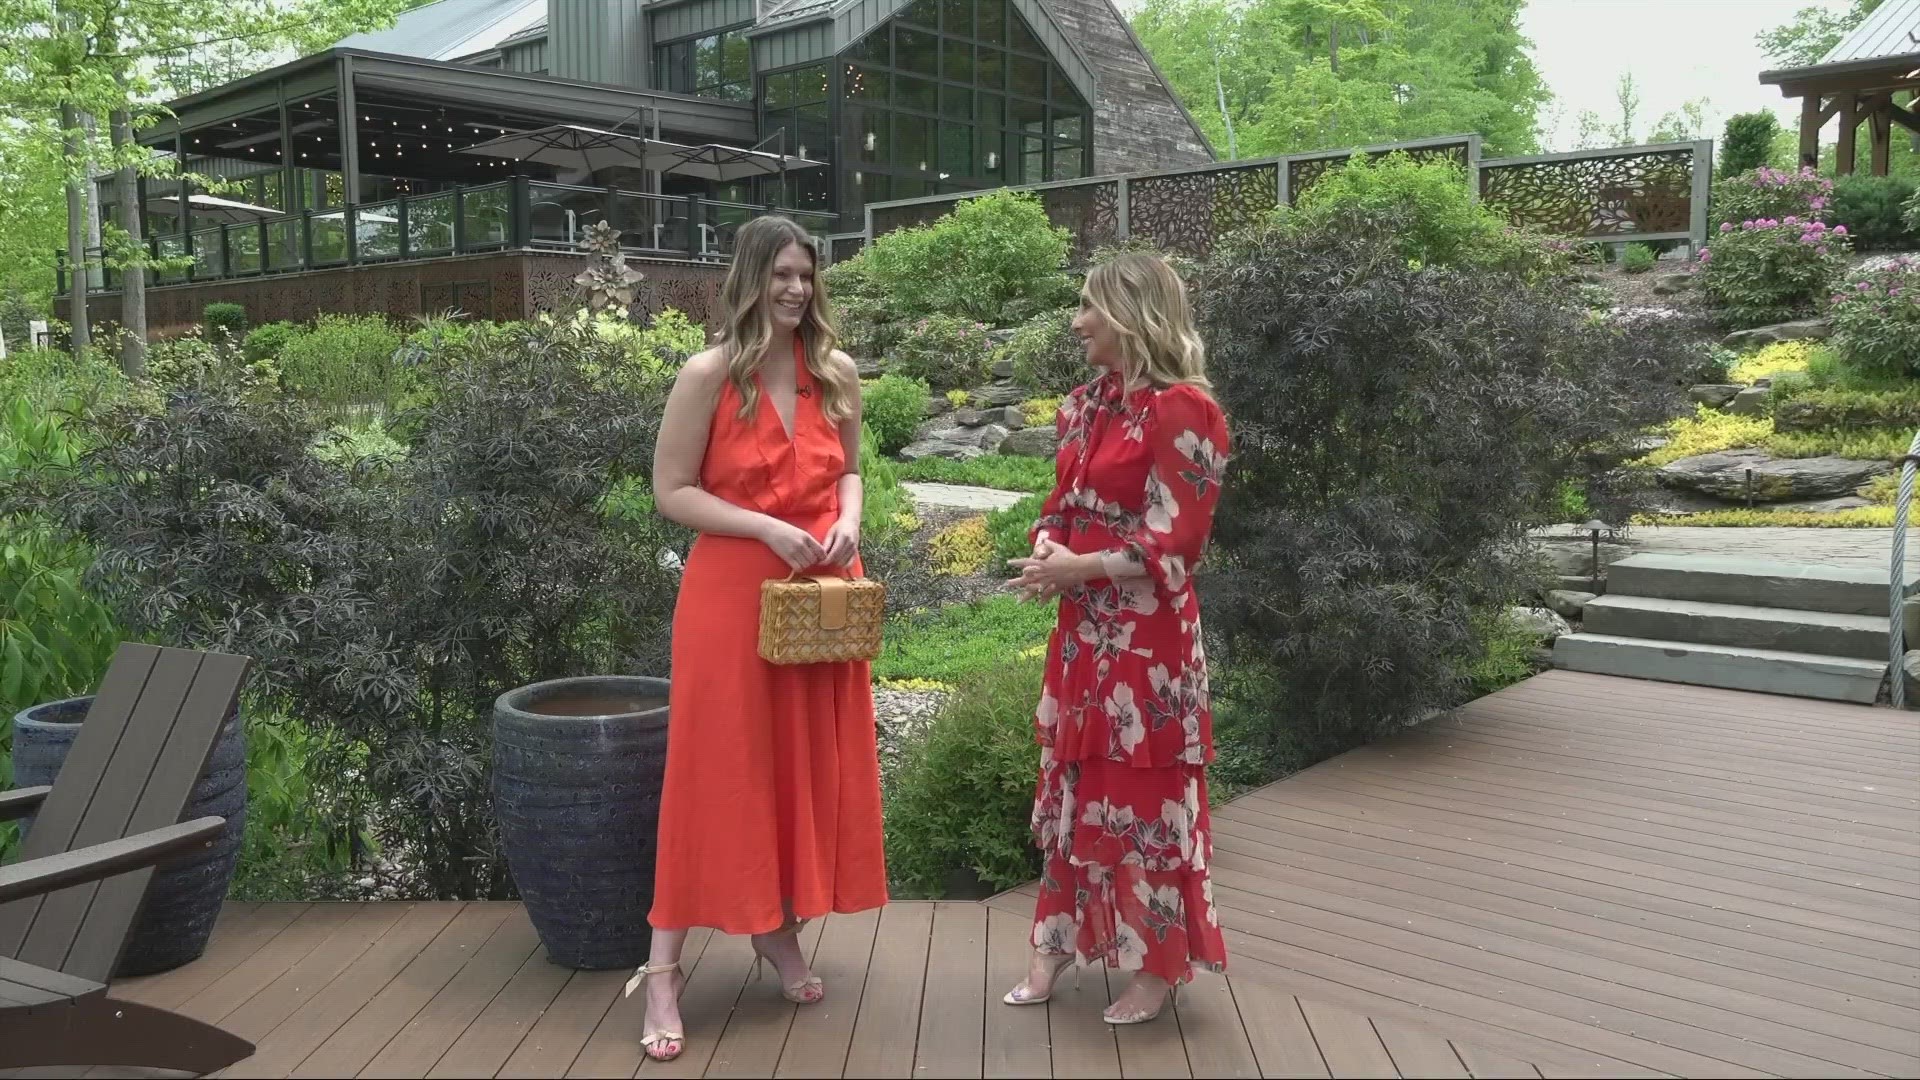 3News Style Contributor Hallie Abrams shares some style inspiration from area boutiques for summer events of all kinds.